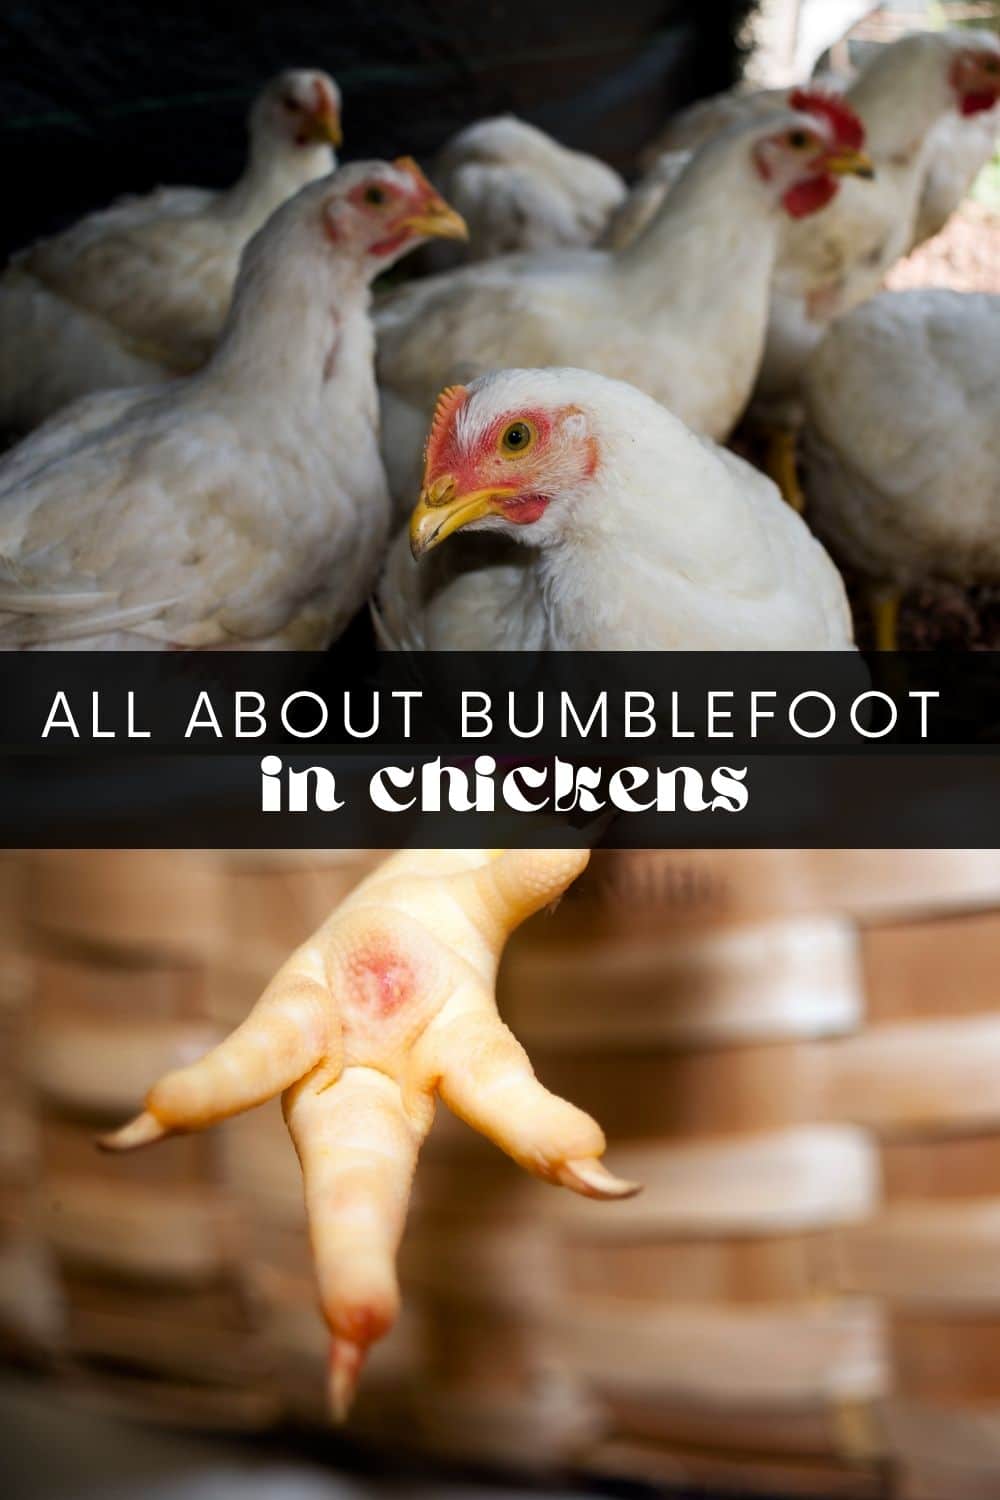 Bumblefoot is a common bacterial infection that can lead to serious health issues if left untreated. Learn how to prevent and treat bumblefoot, as well as other ways to keep your chickens happy and healthy in their coop! 